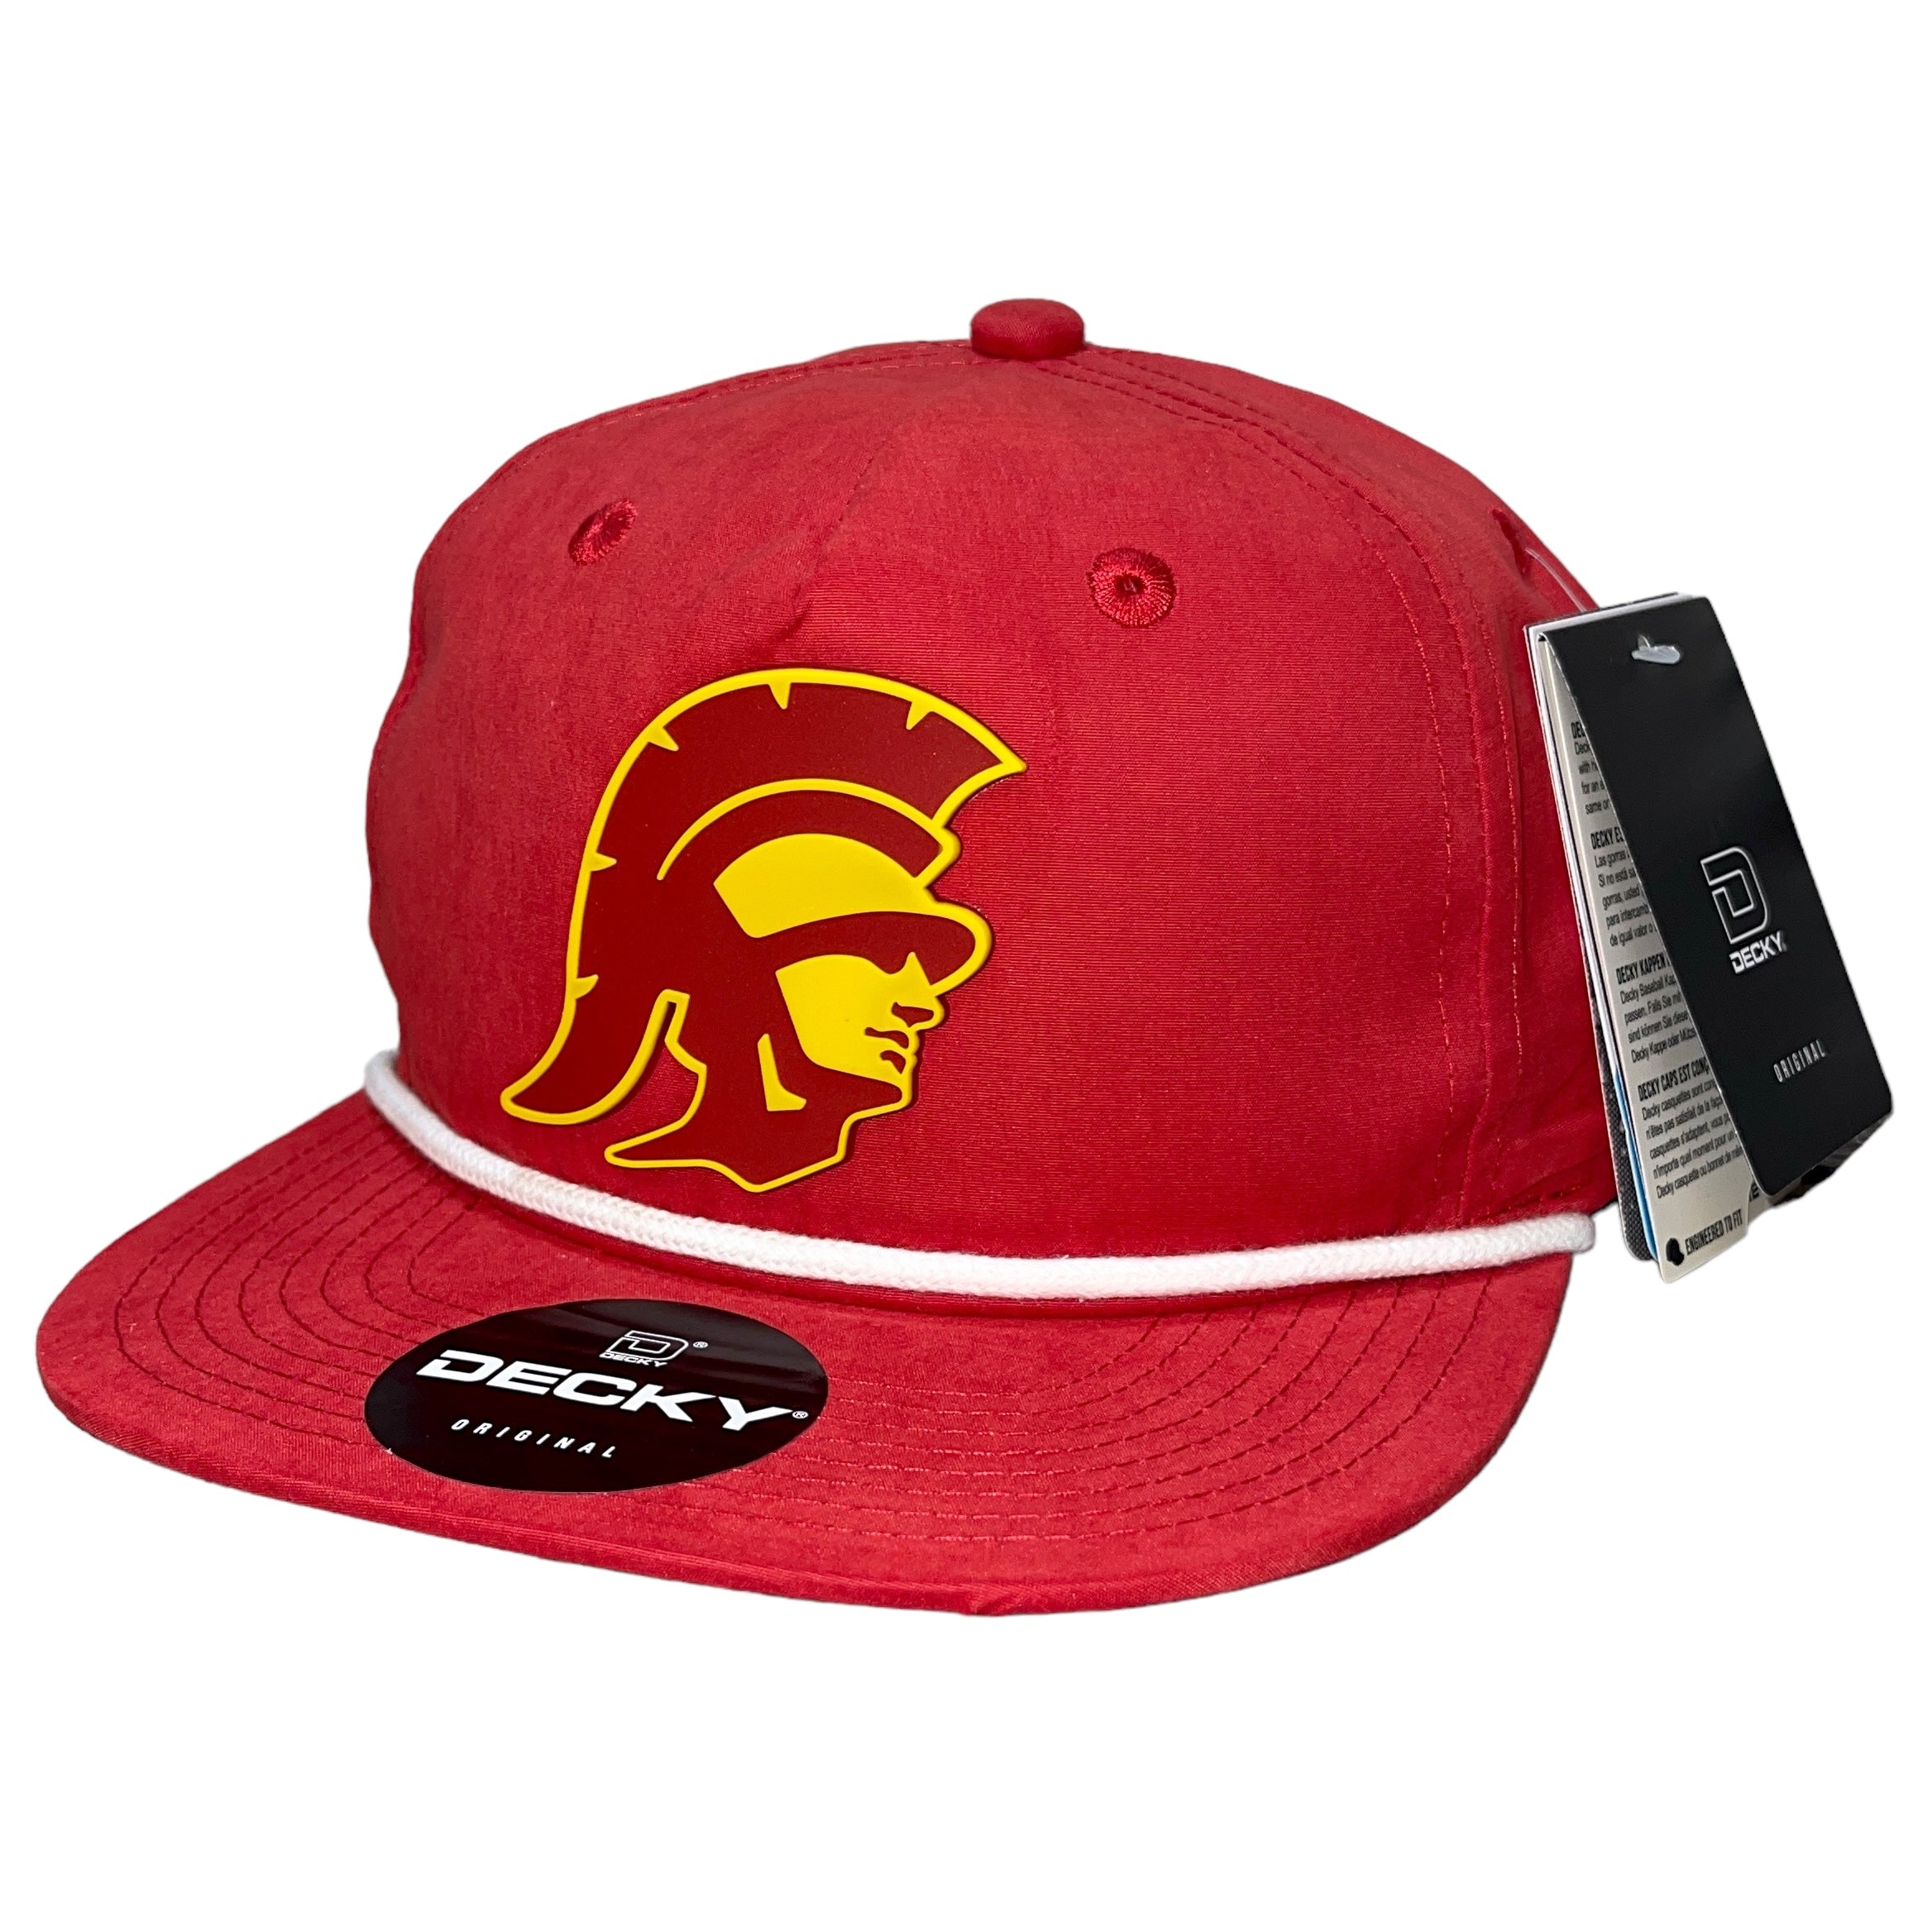 USC Trojans 3D Classic Rope Hat- Red/ White